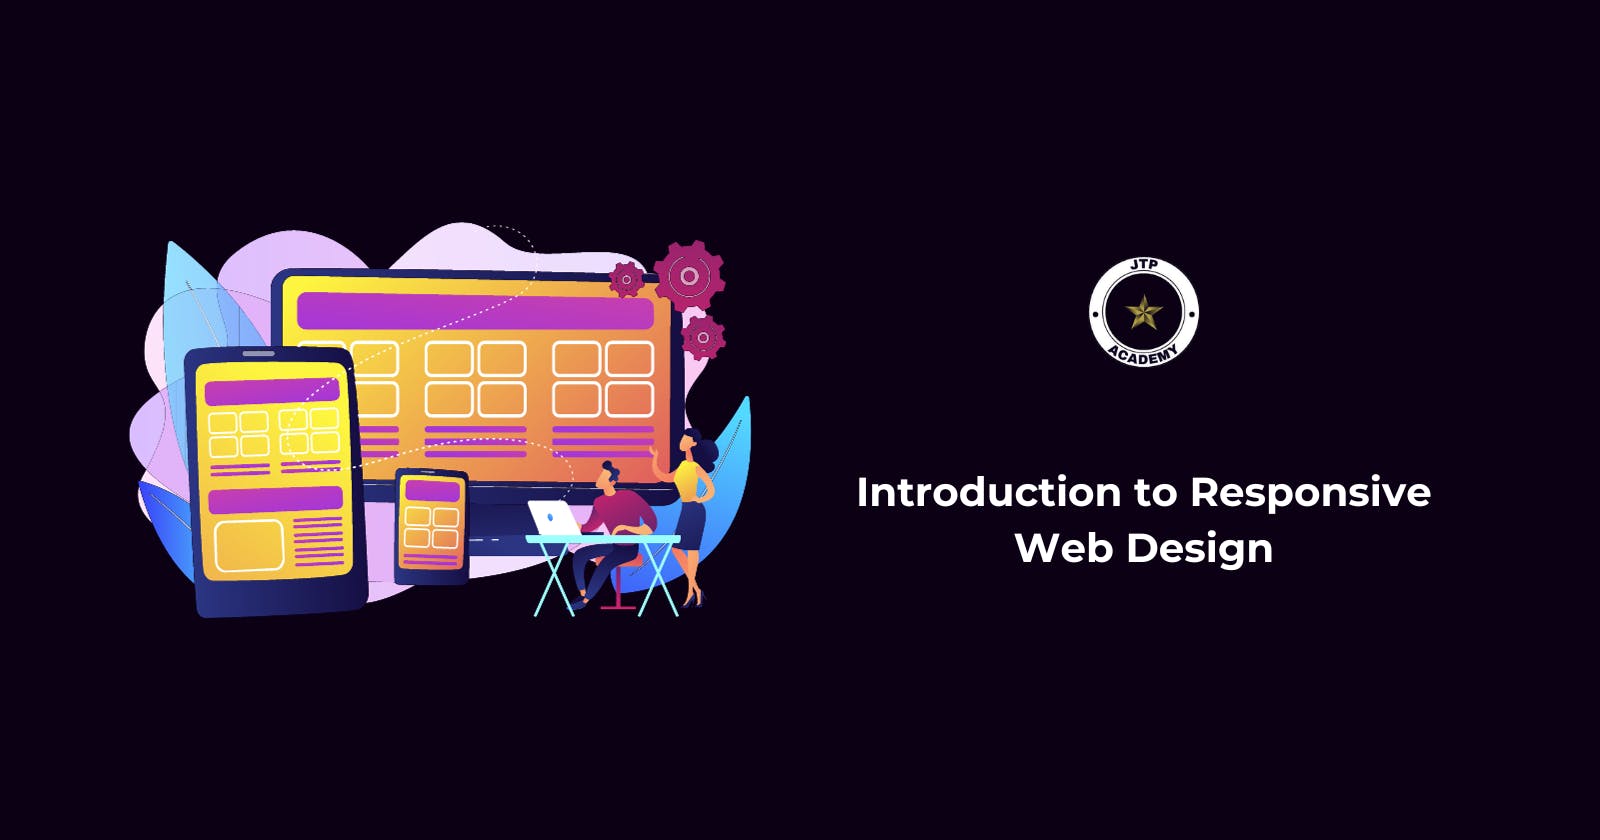 Introduction to Responsive Web Design with HTML and CSS